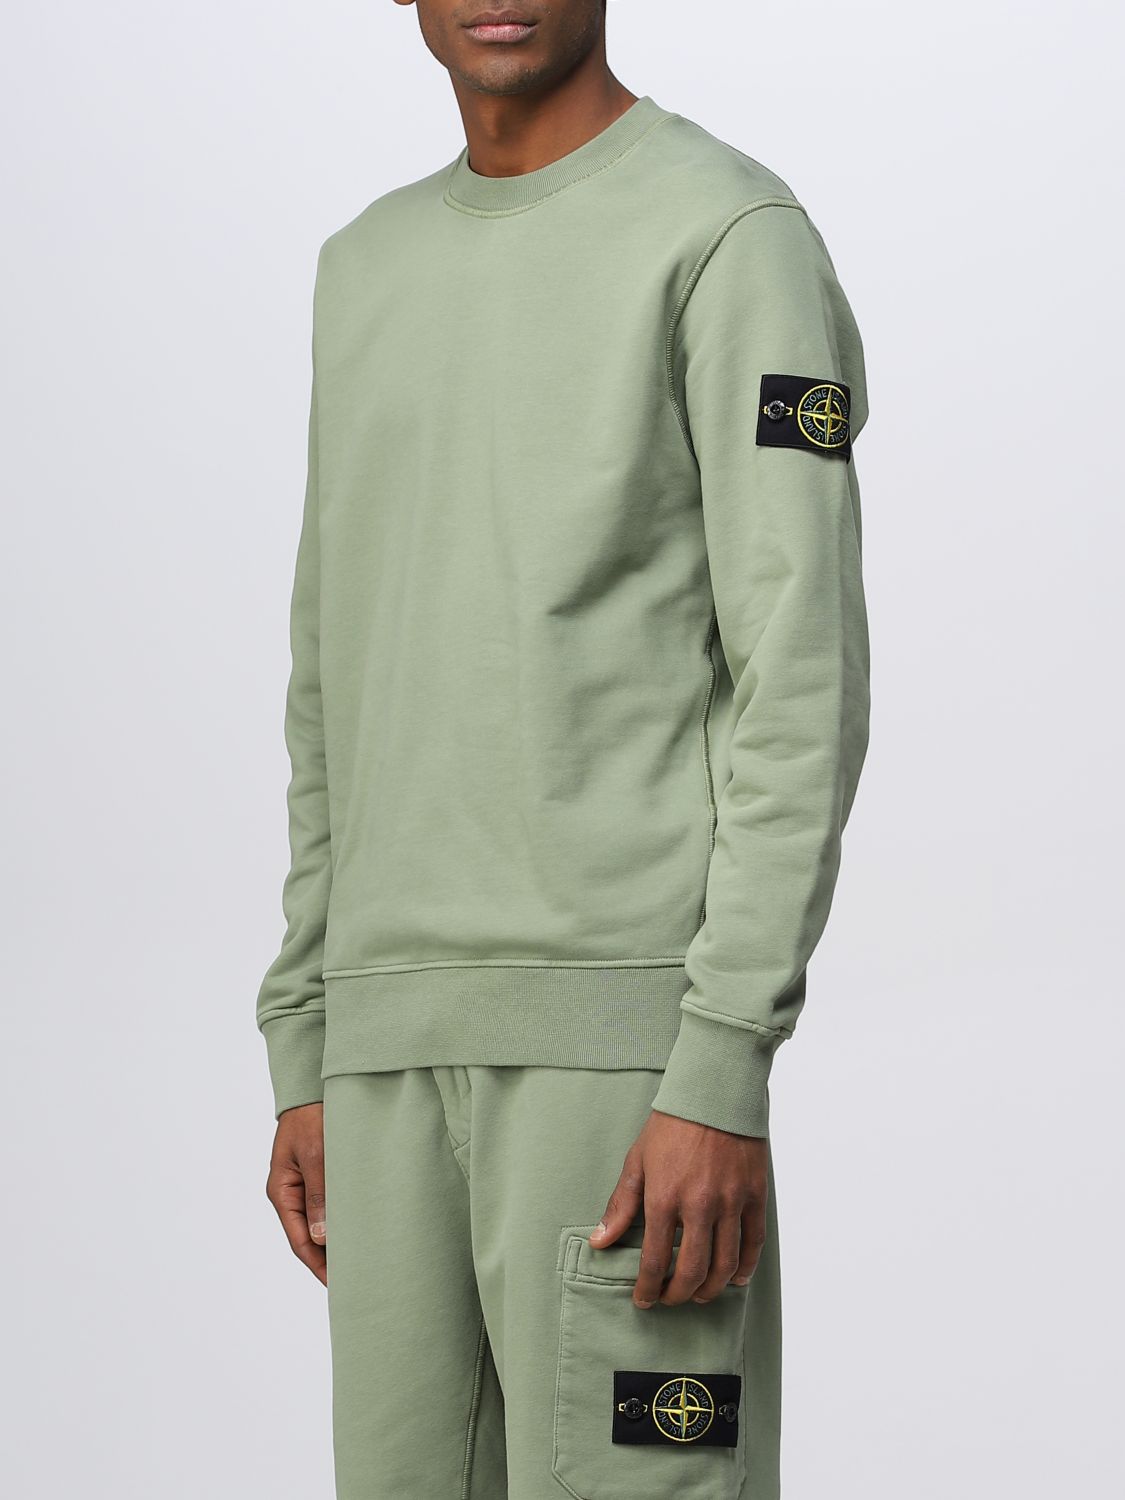 stone island-www.coumes-spring.co.uk